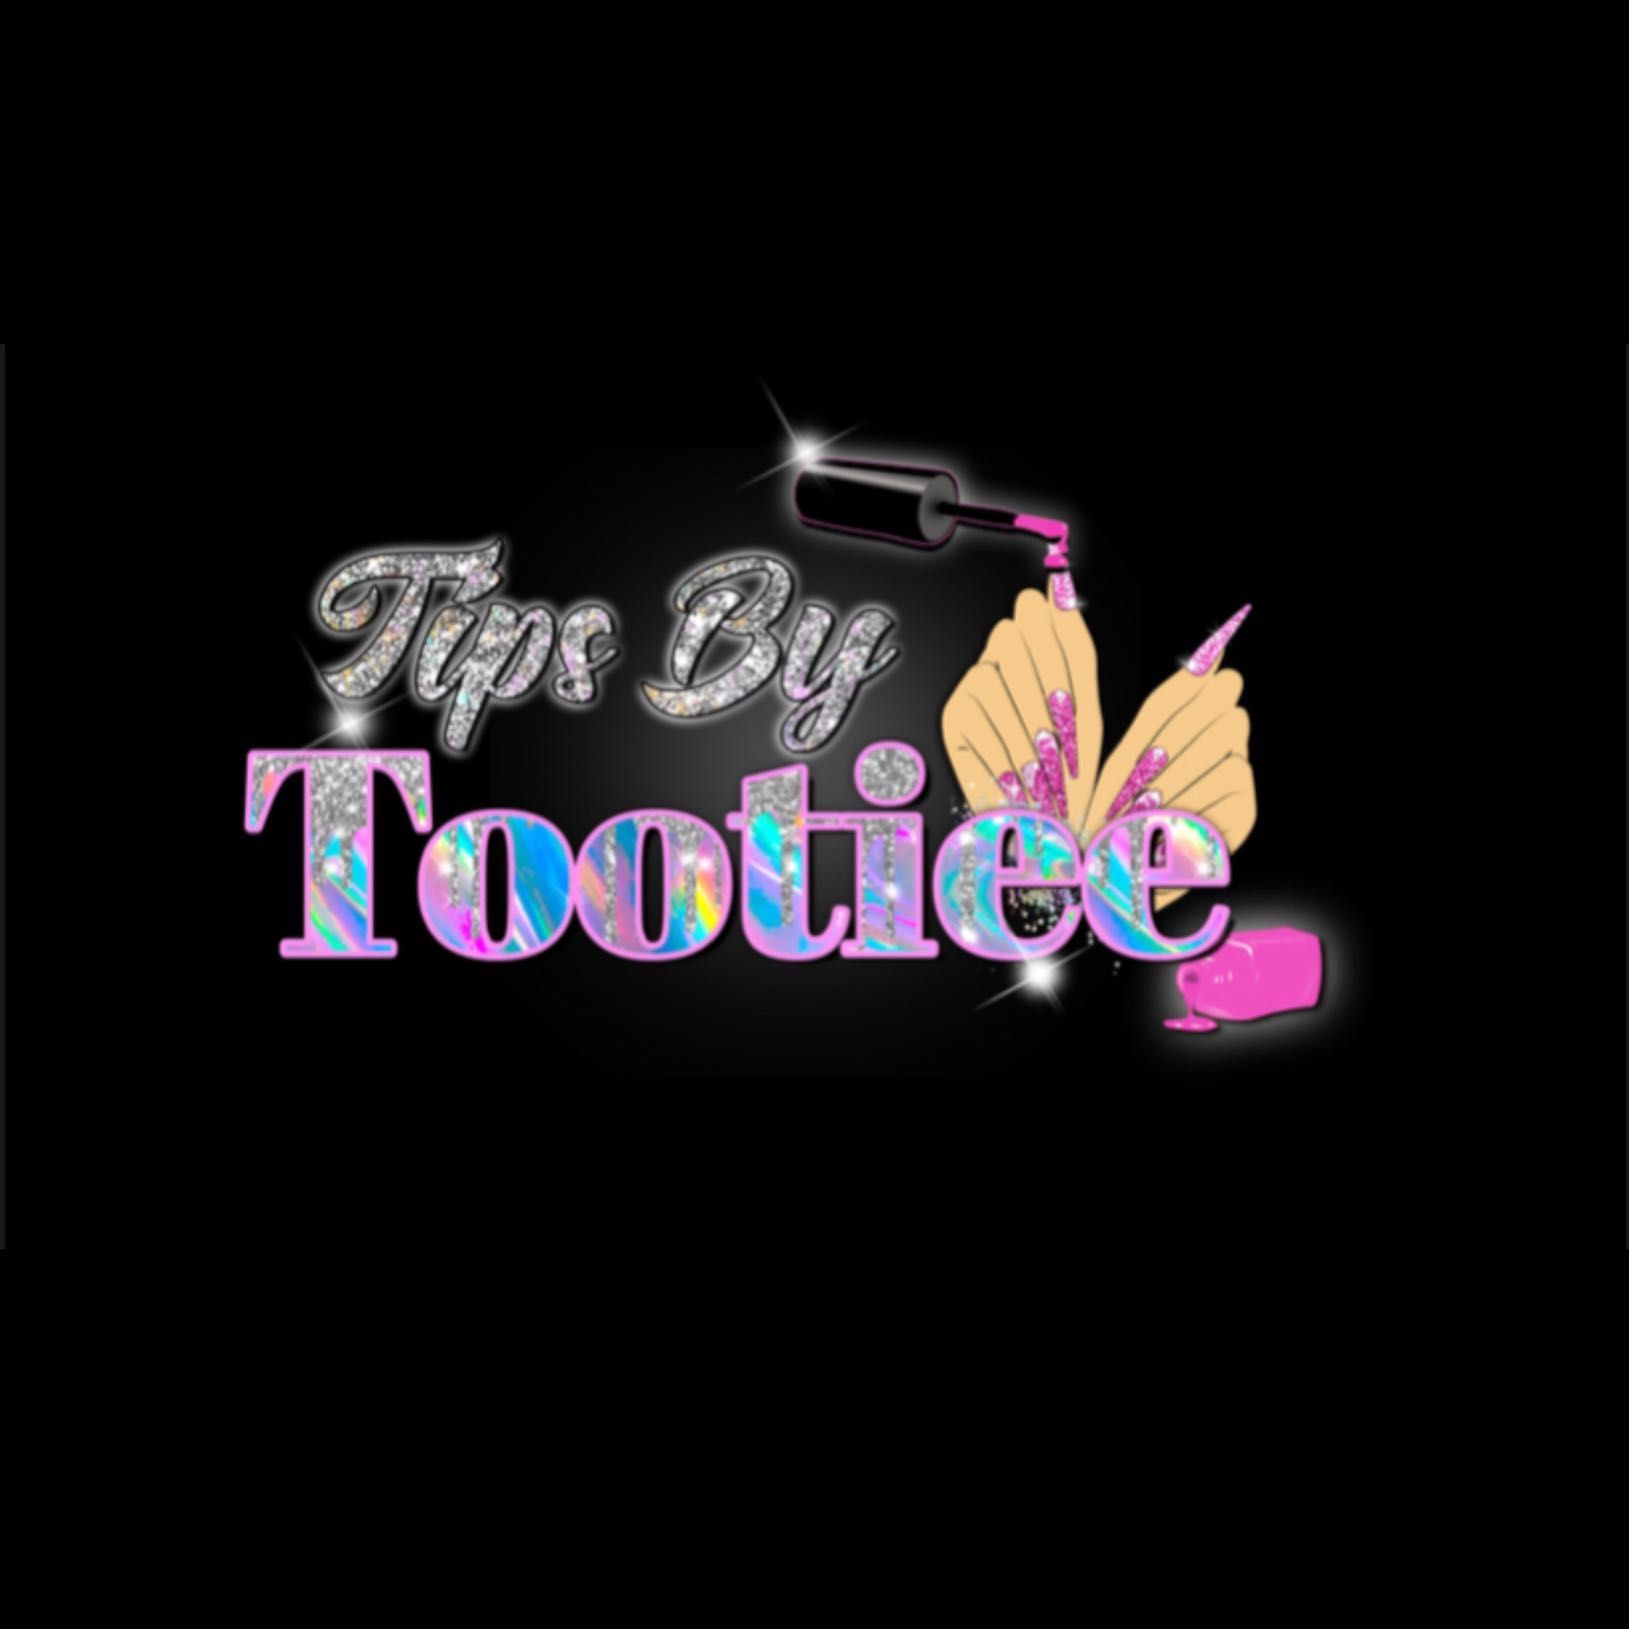 Tips By Tootiee, 10856 Anderson Road, Piedmont, 29672